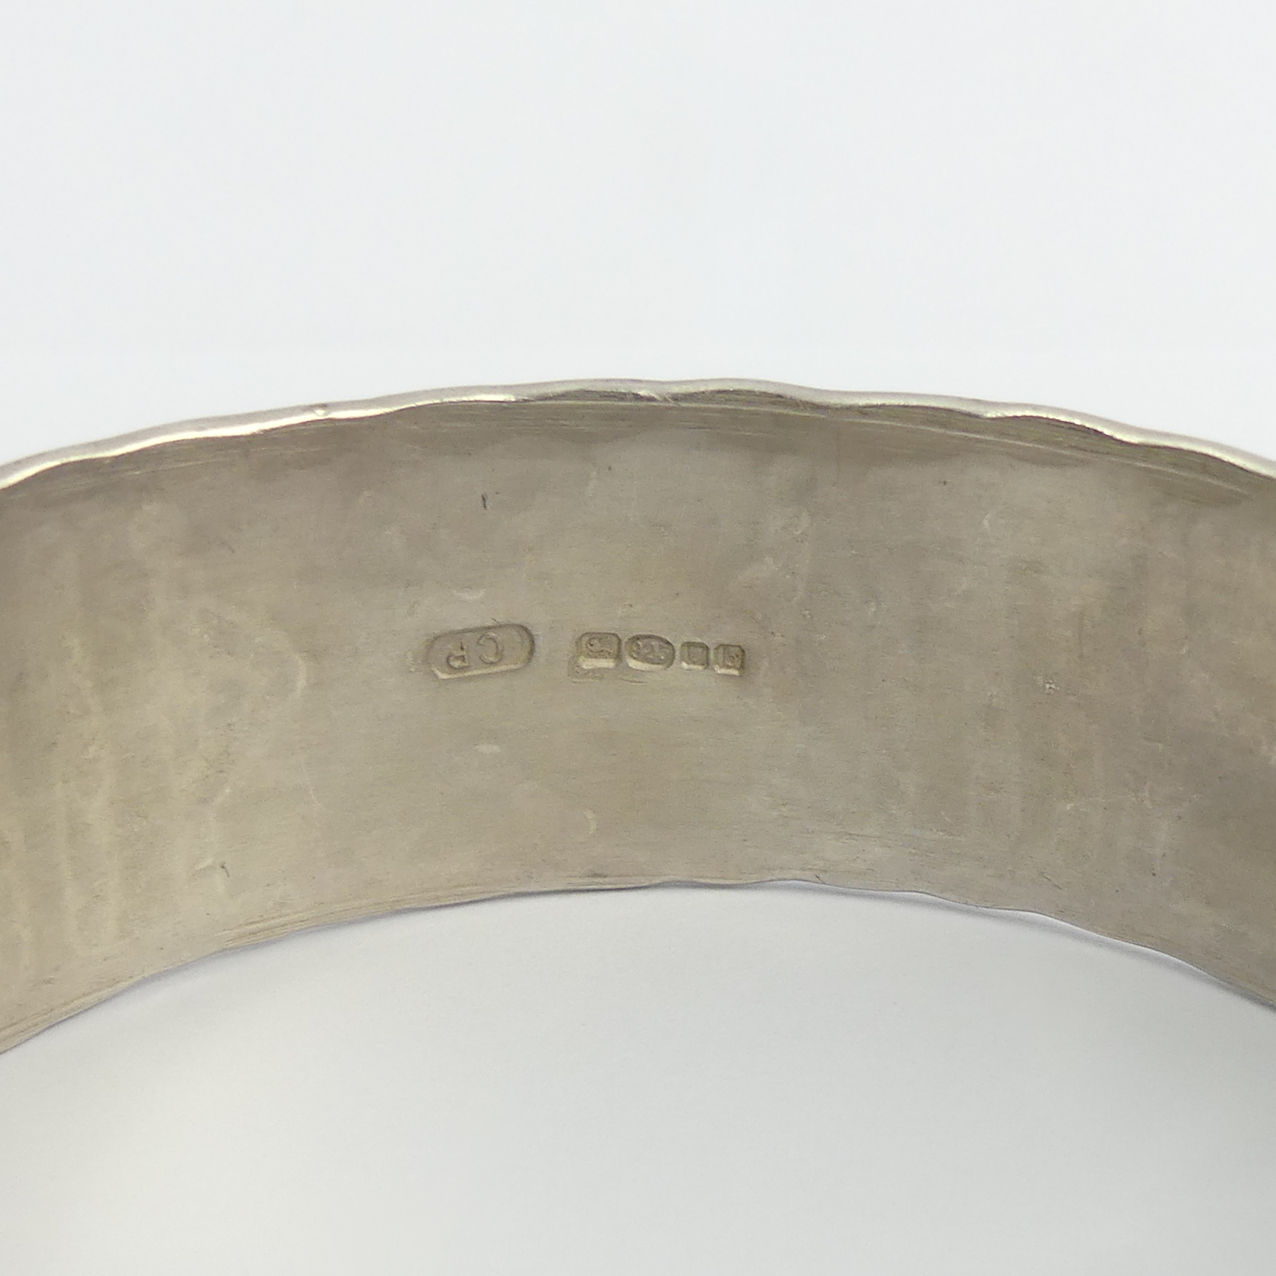 Stylish hand made silver bangle, London 2001, 42 grams. 22 mm wide. Uk Postage £12. - Image 4 of 5